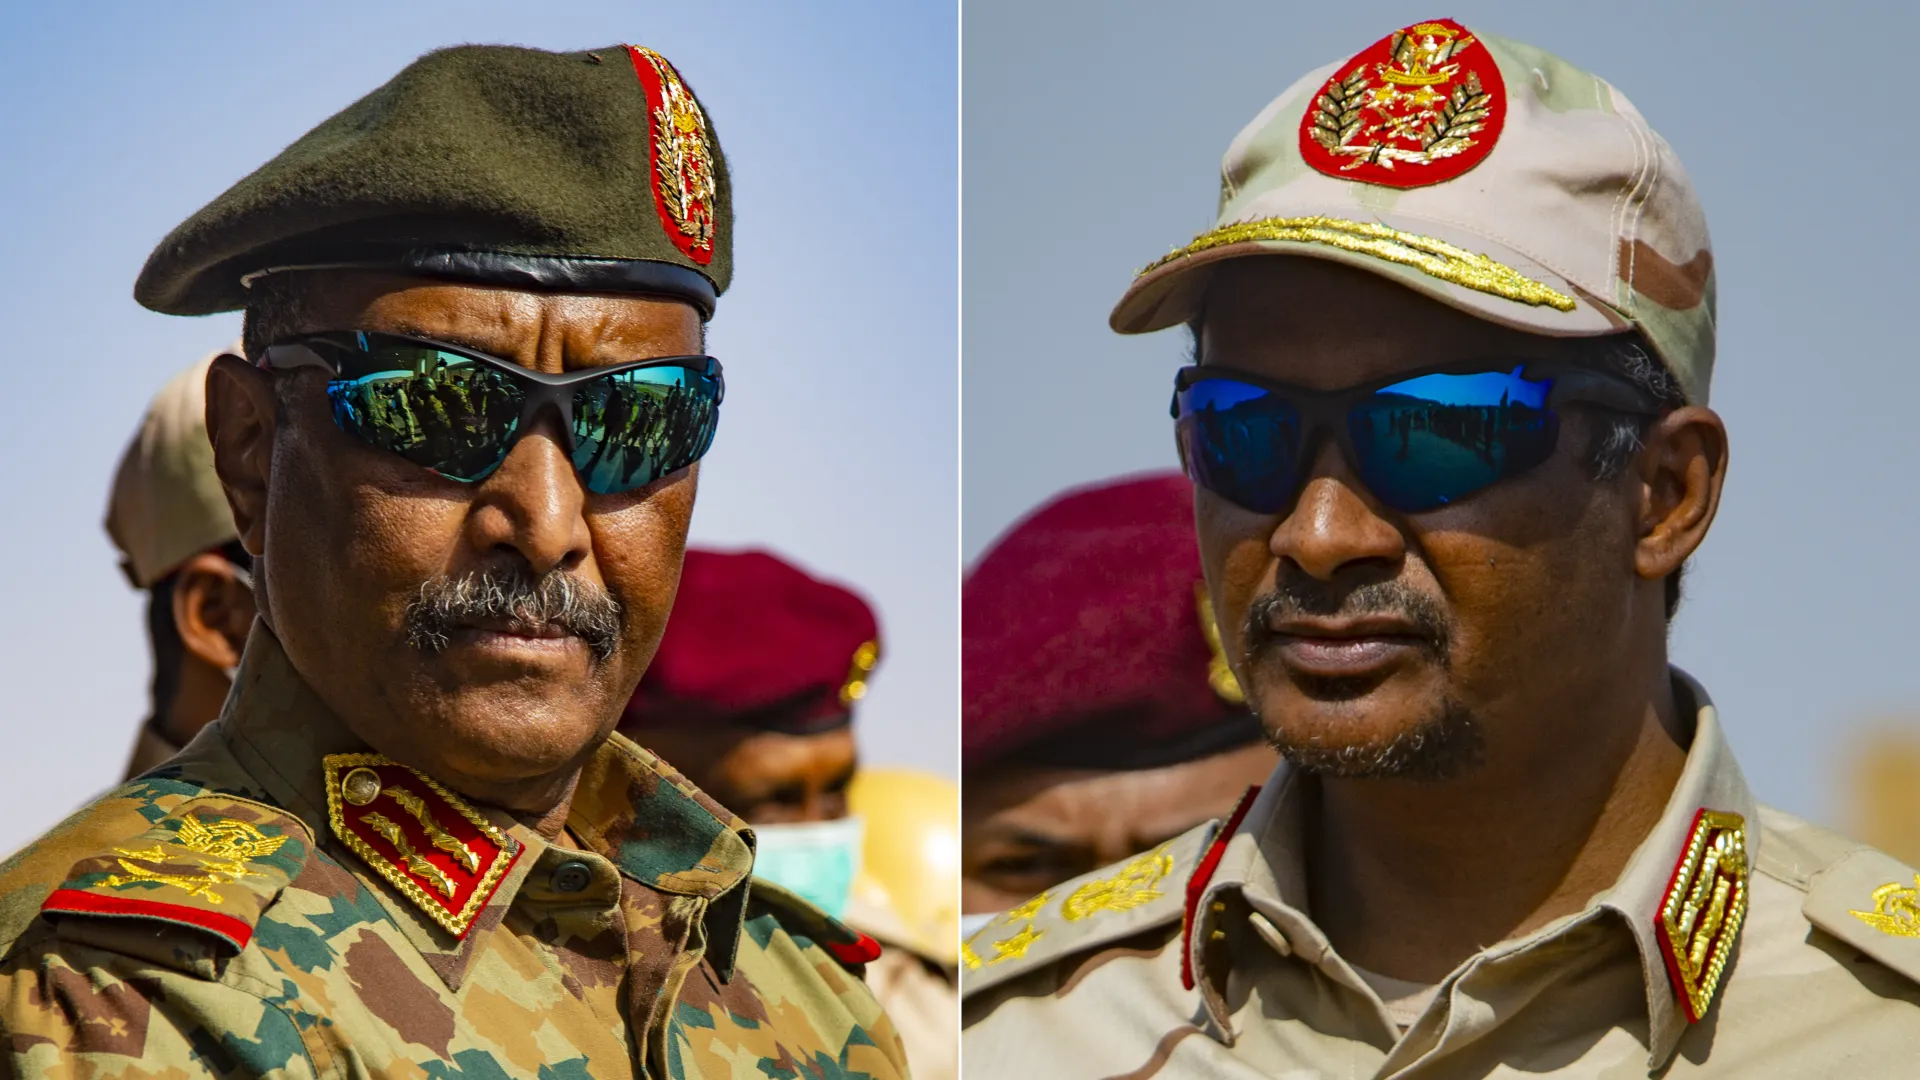 Sudan’s warring parties agree to 72-hour ceasefire